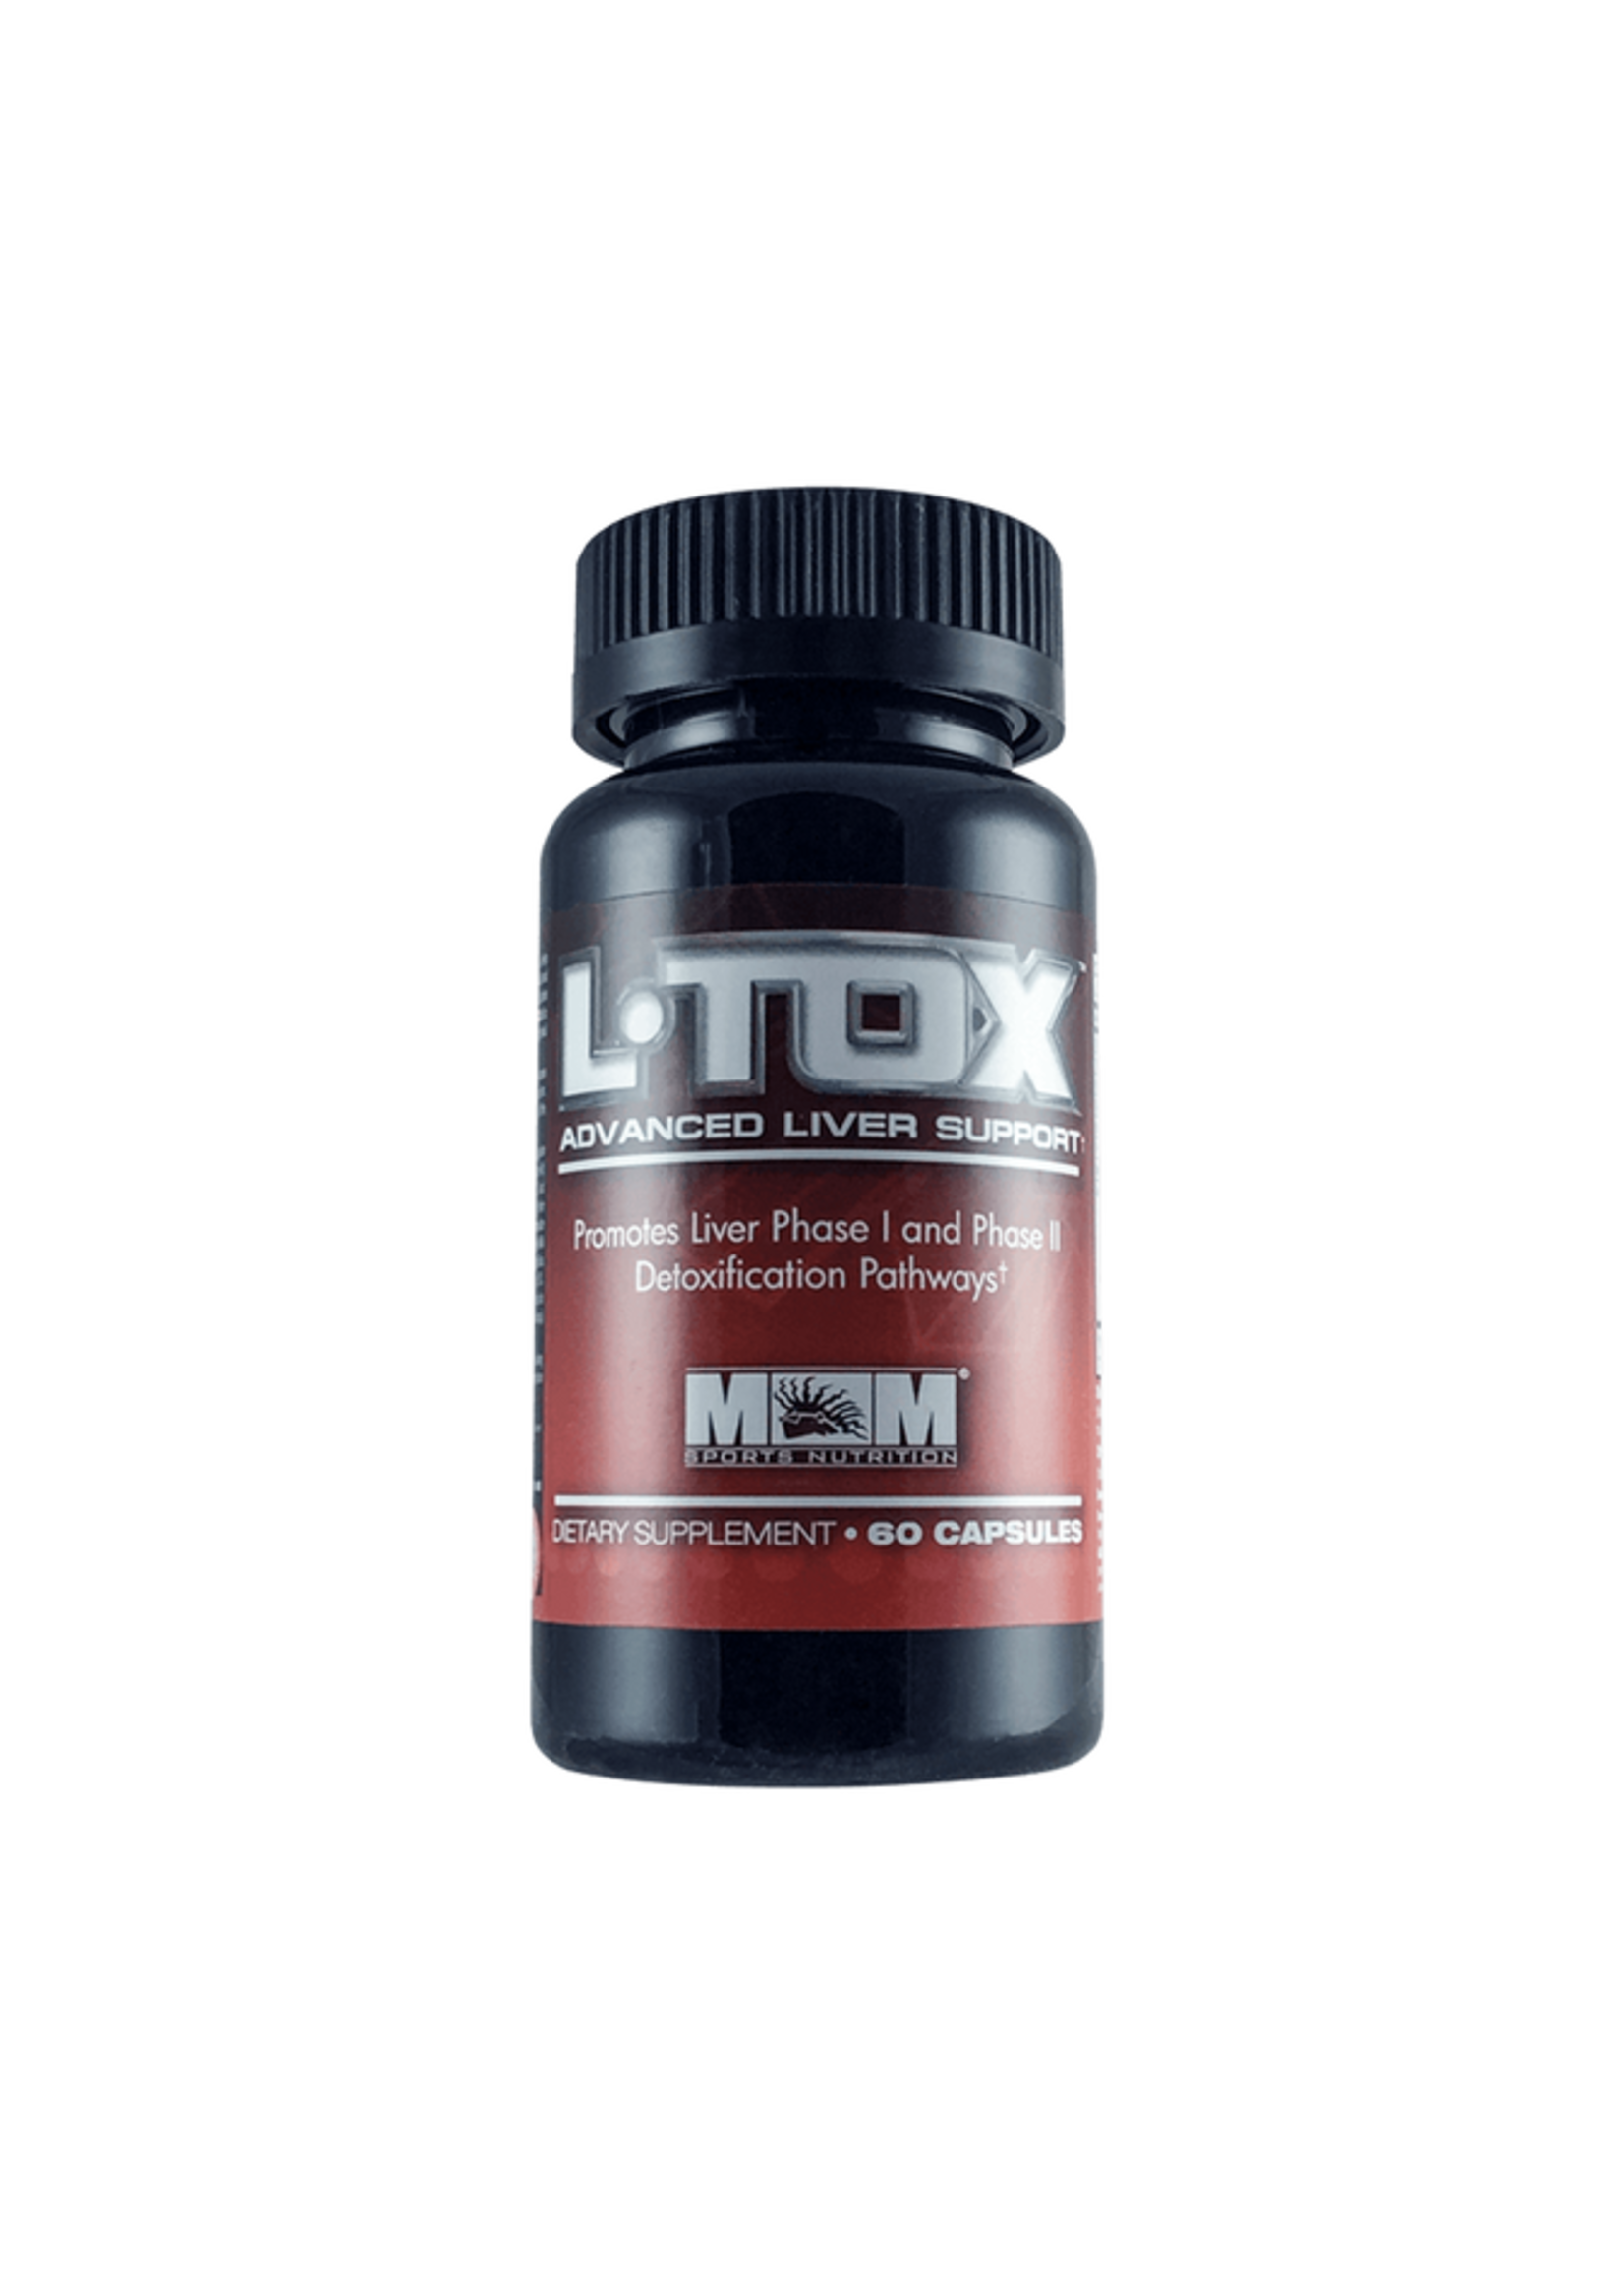 Max Muscle L-Tox